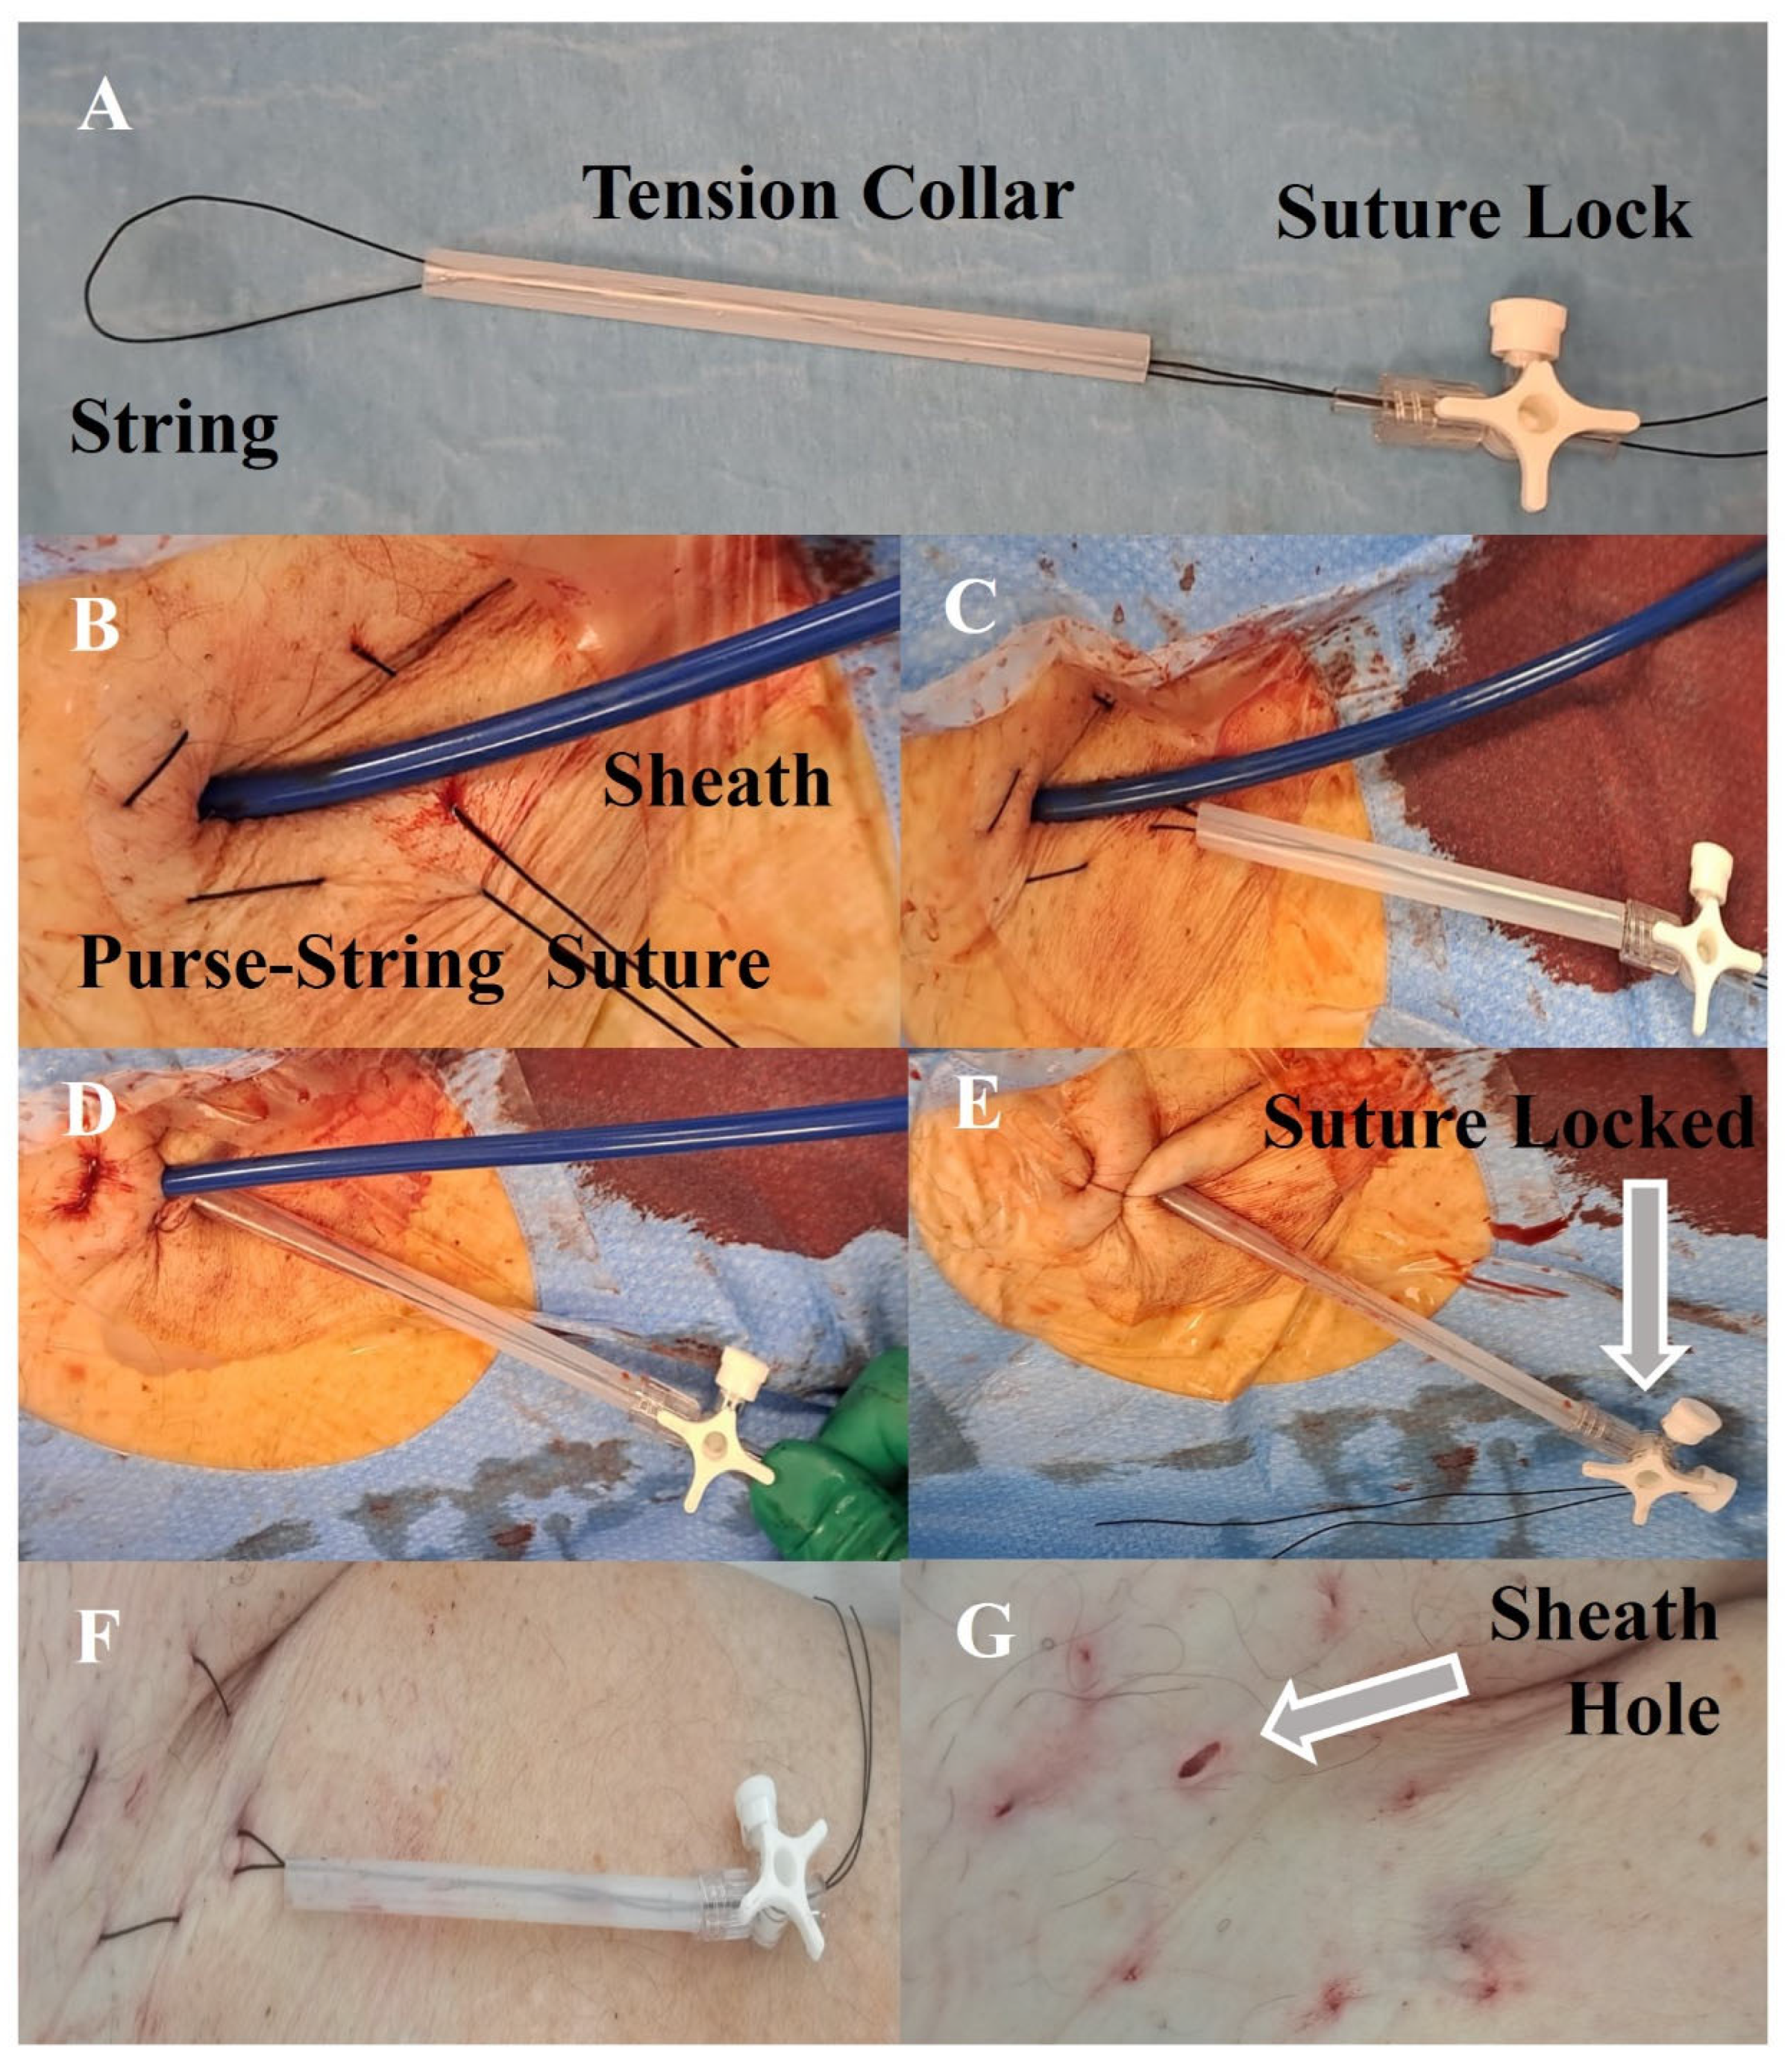 Specially Designed Portable Meril Purse String Suturing Practice  Model-PurSew, Suitable in Colorectal Surgery Training Curriculum for  Medical Students, Residents, Anorectal Surgeons: Amazon.com: Industrial &  Scientific